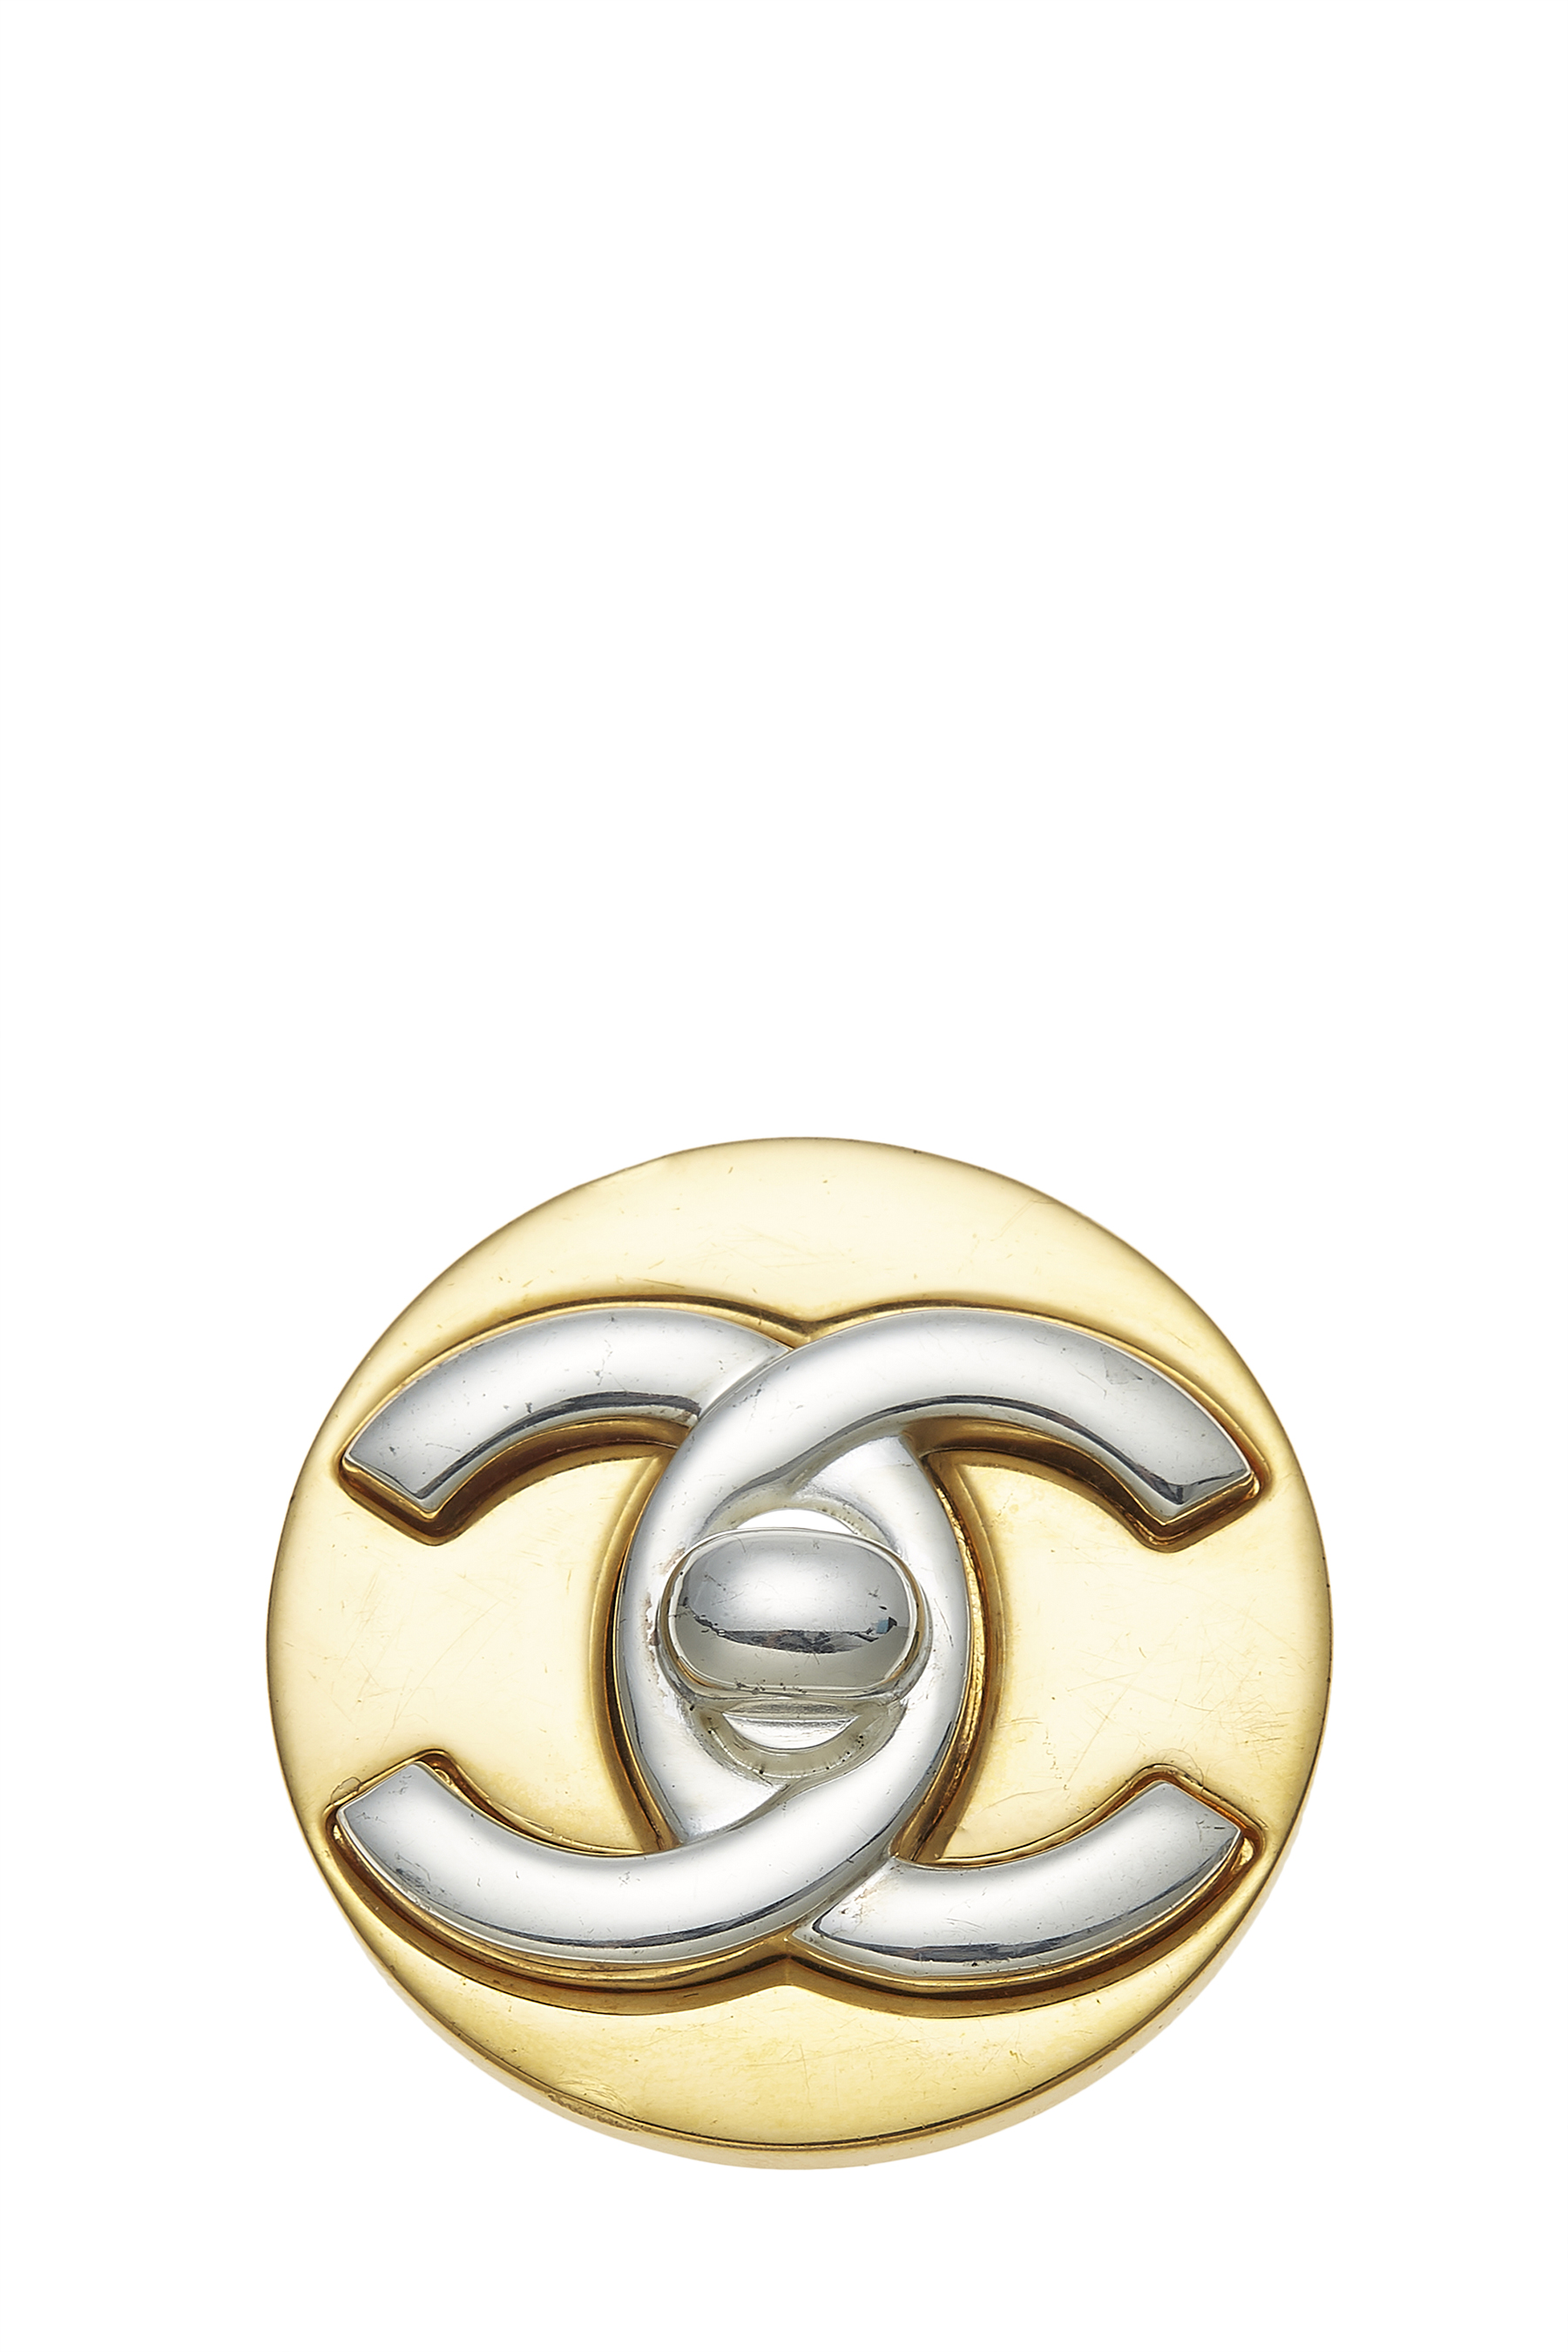 Chanel - Gold & Silver 'CC' Turnlock Pin Large